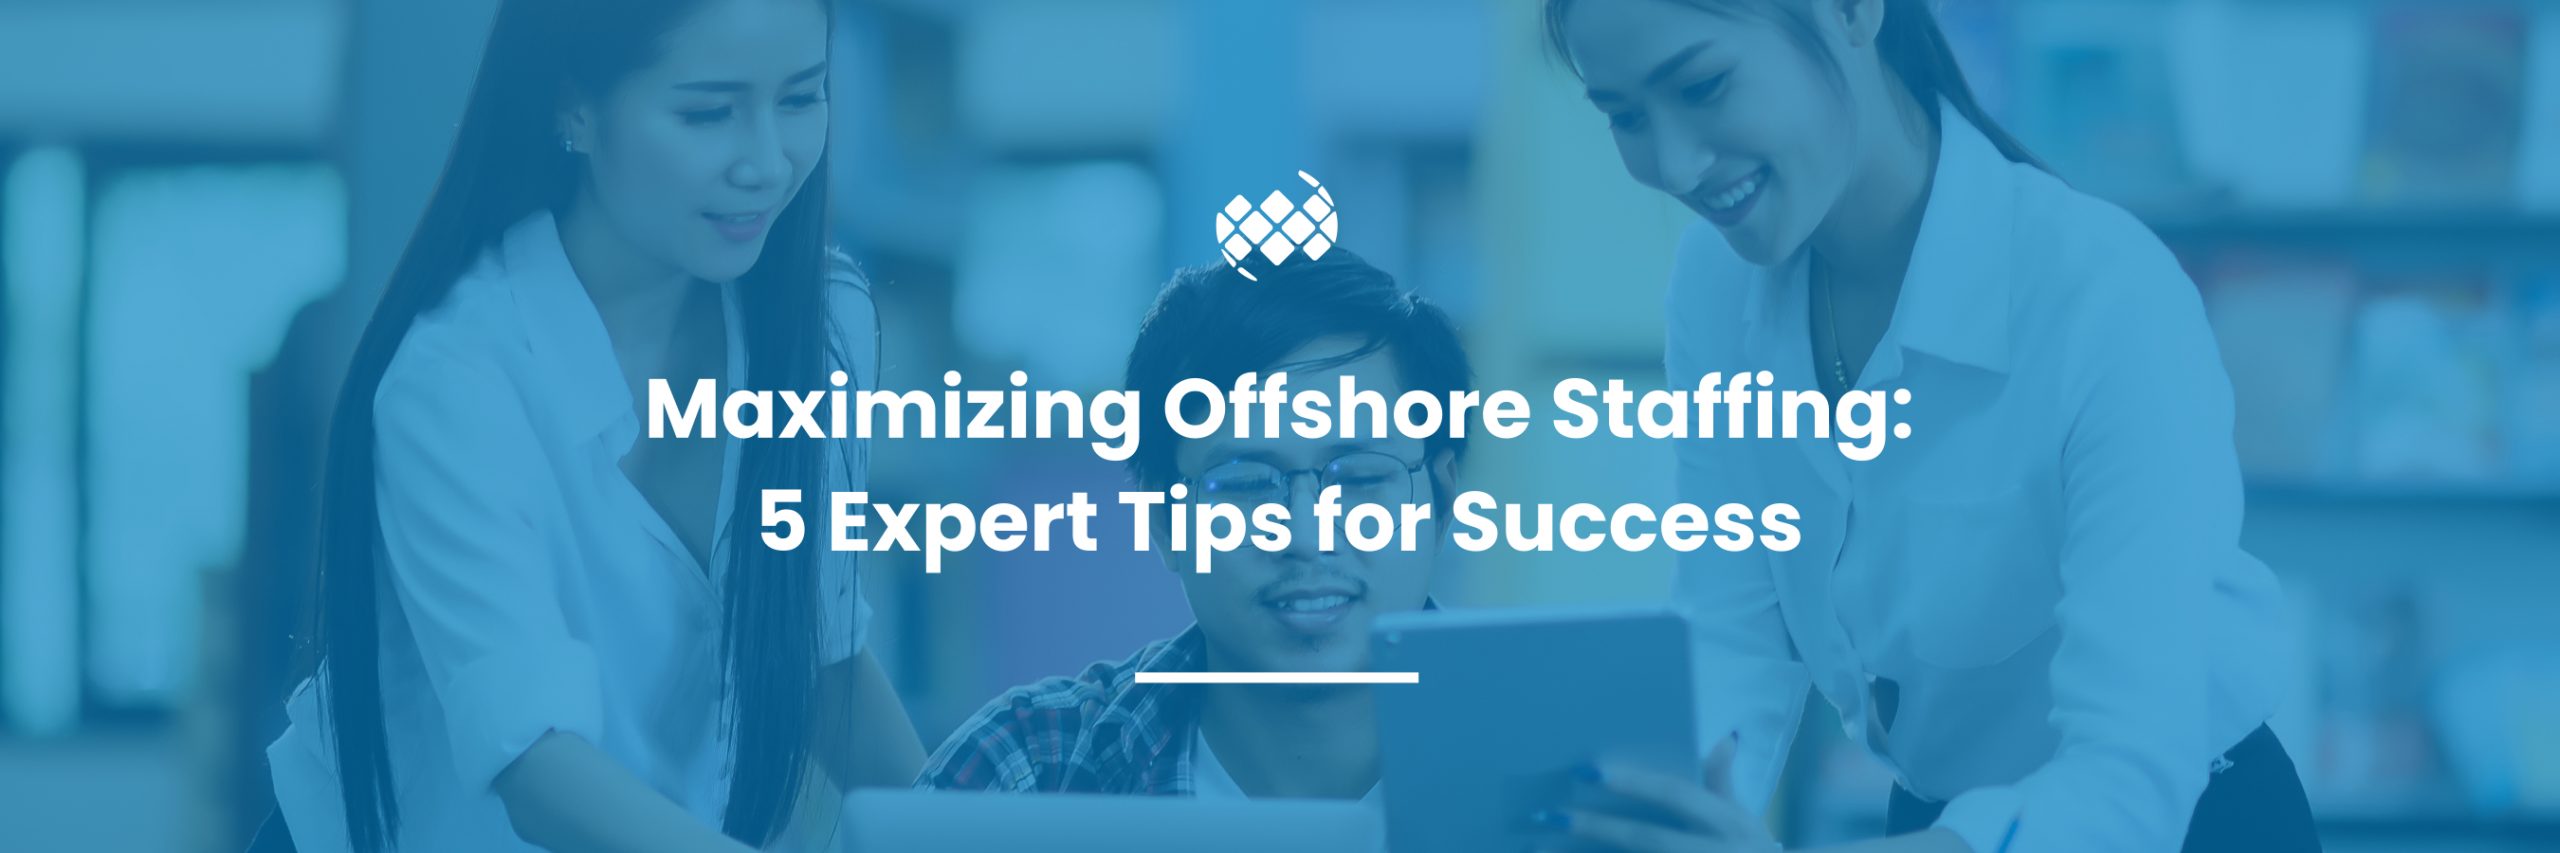 Offshore Staffing